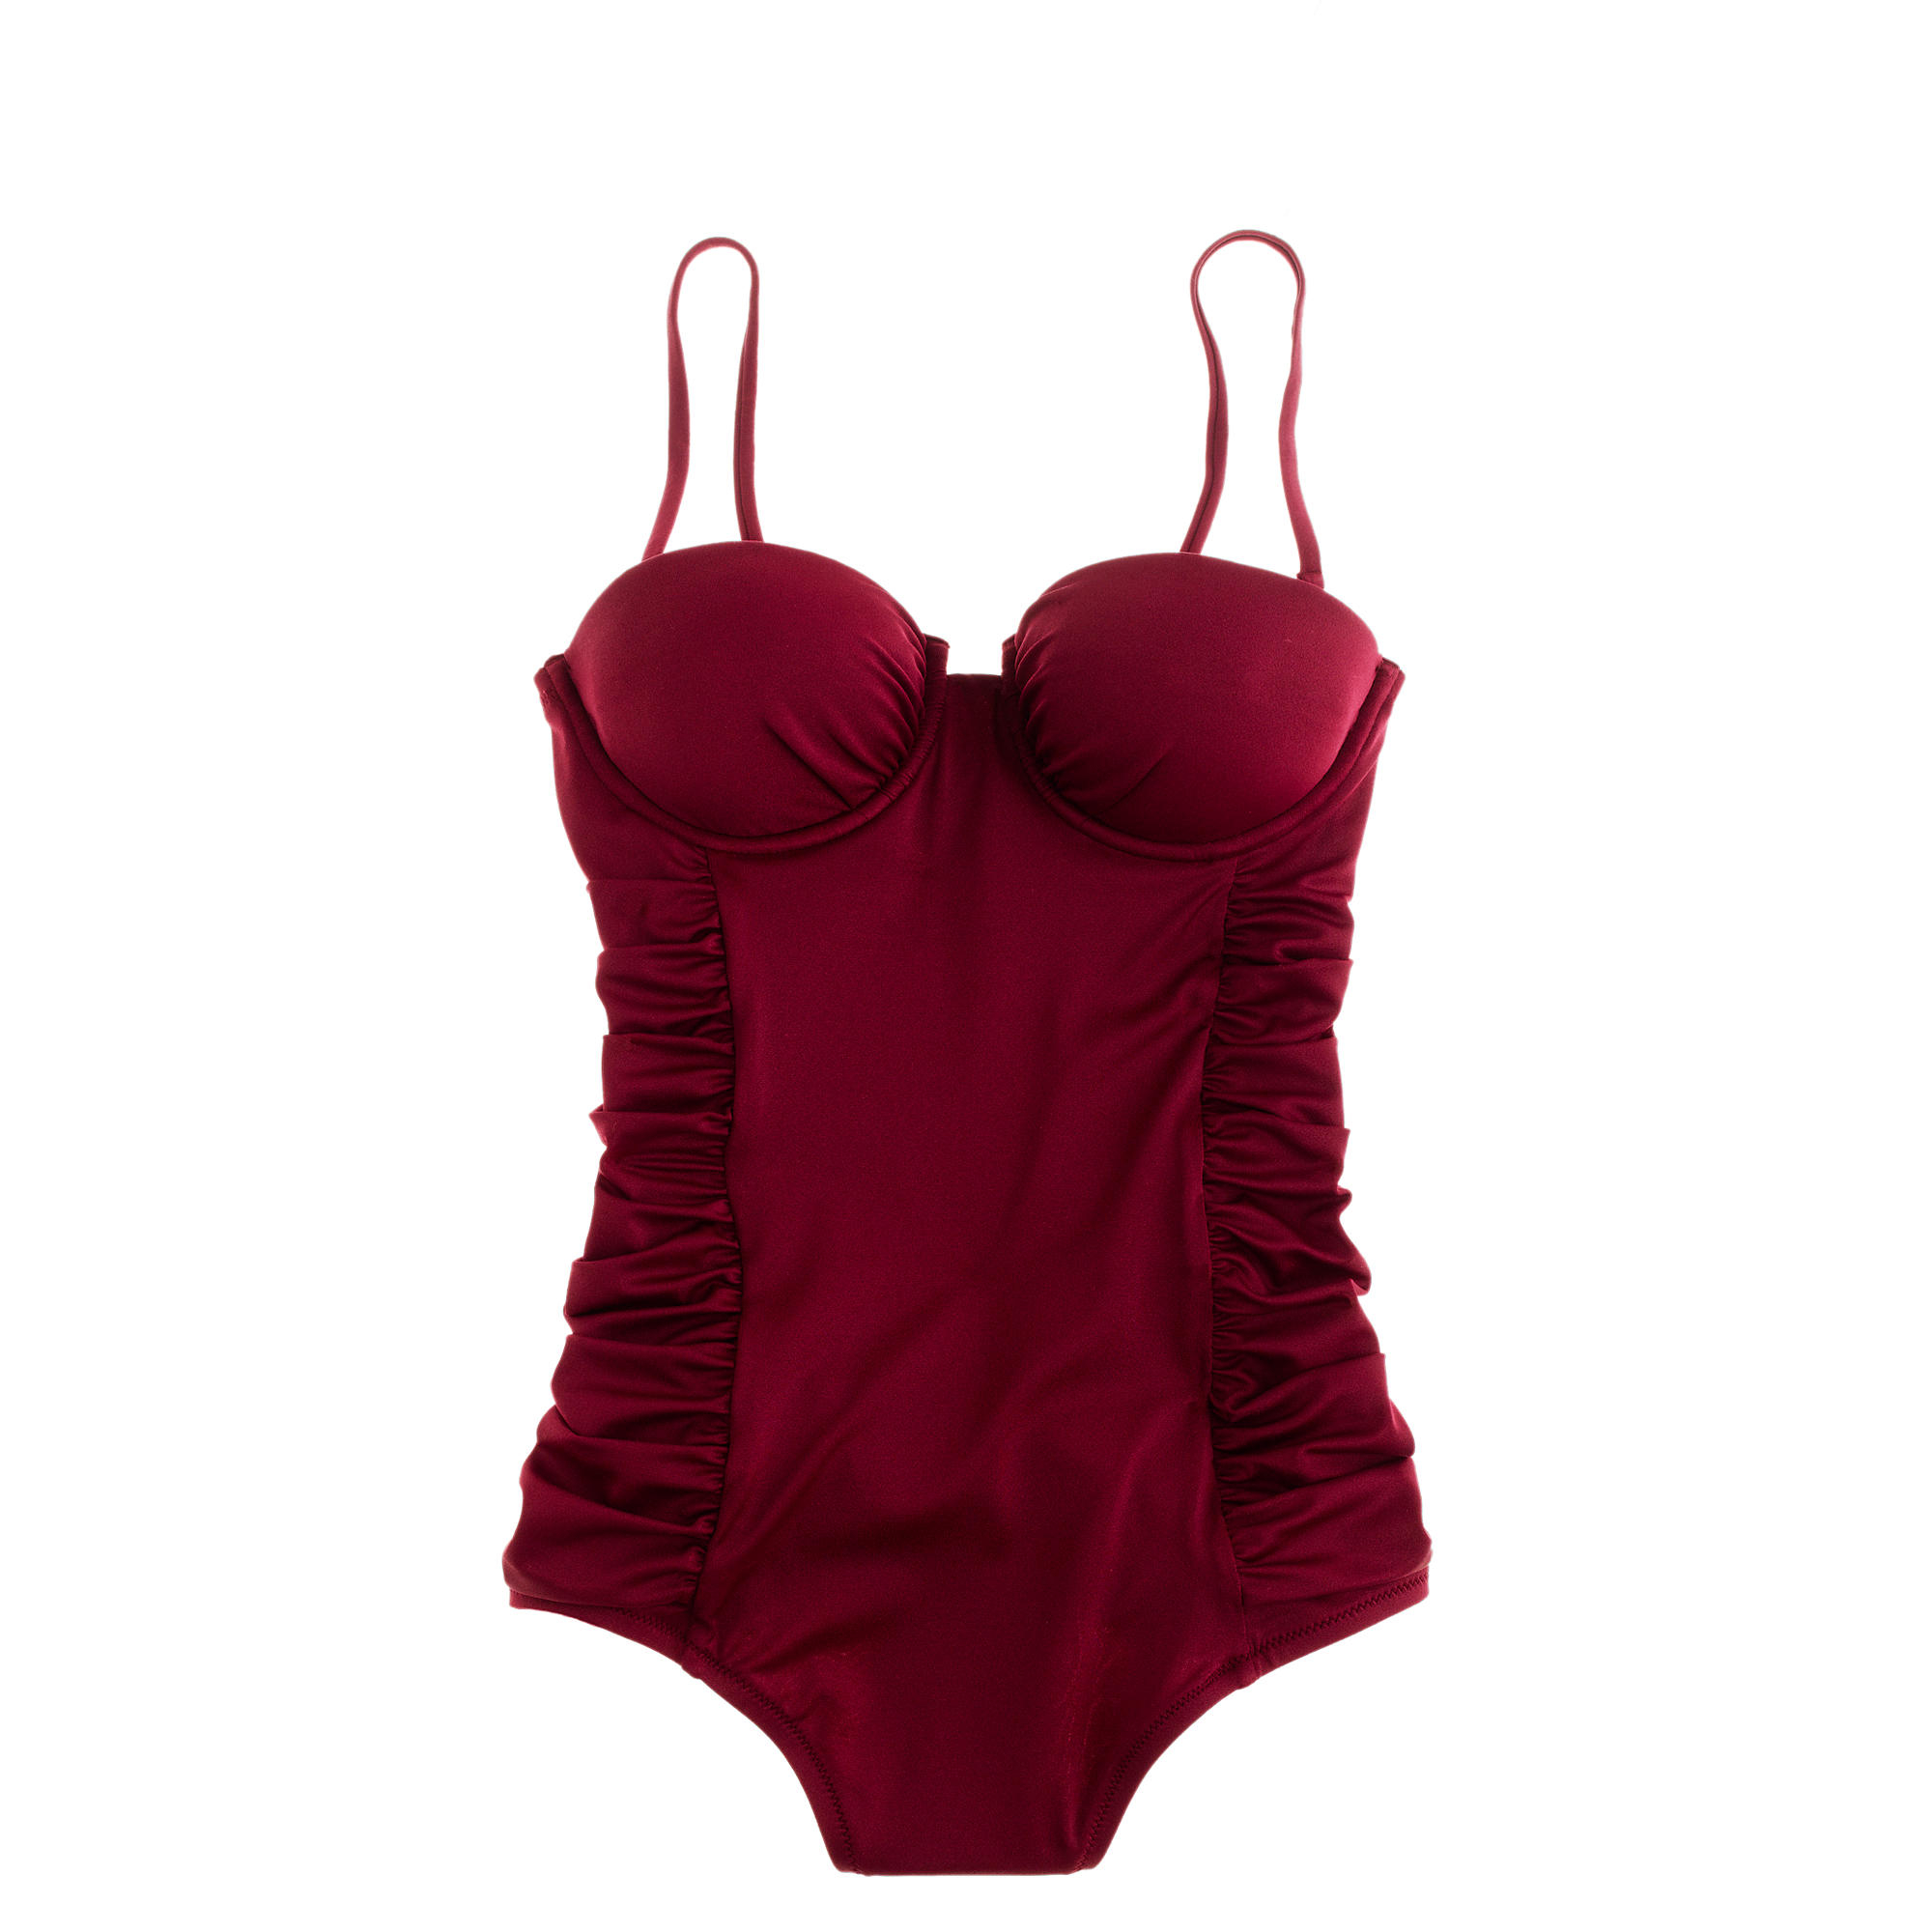 Lyst - J.Crew Long Torso Ruched Underwire One-piece Swimsuit in Red